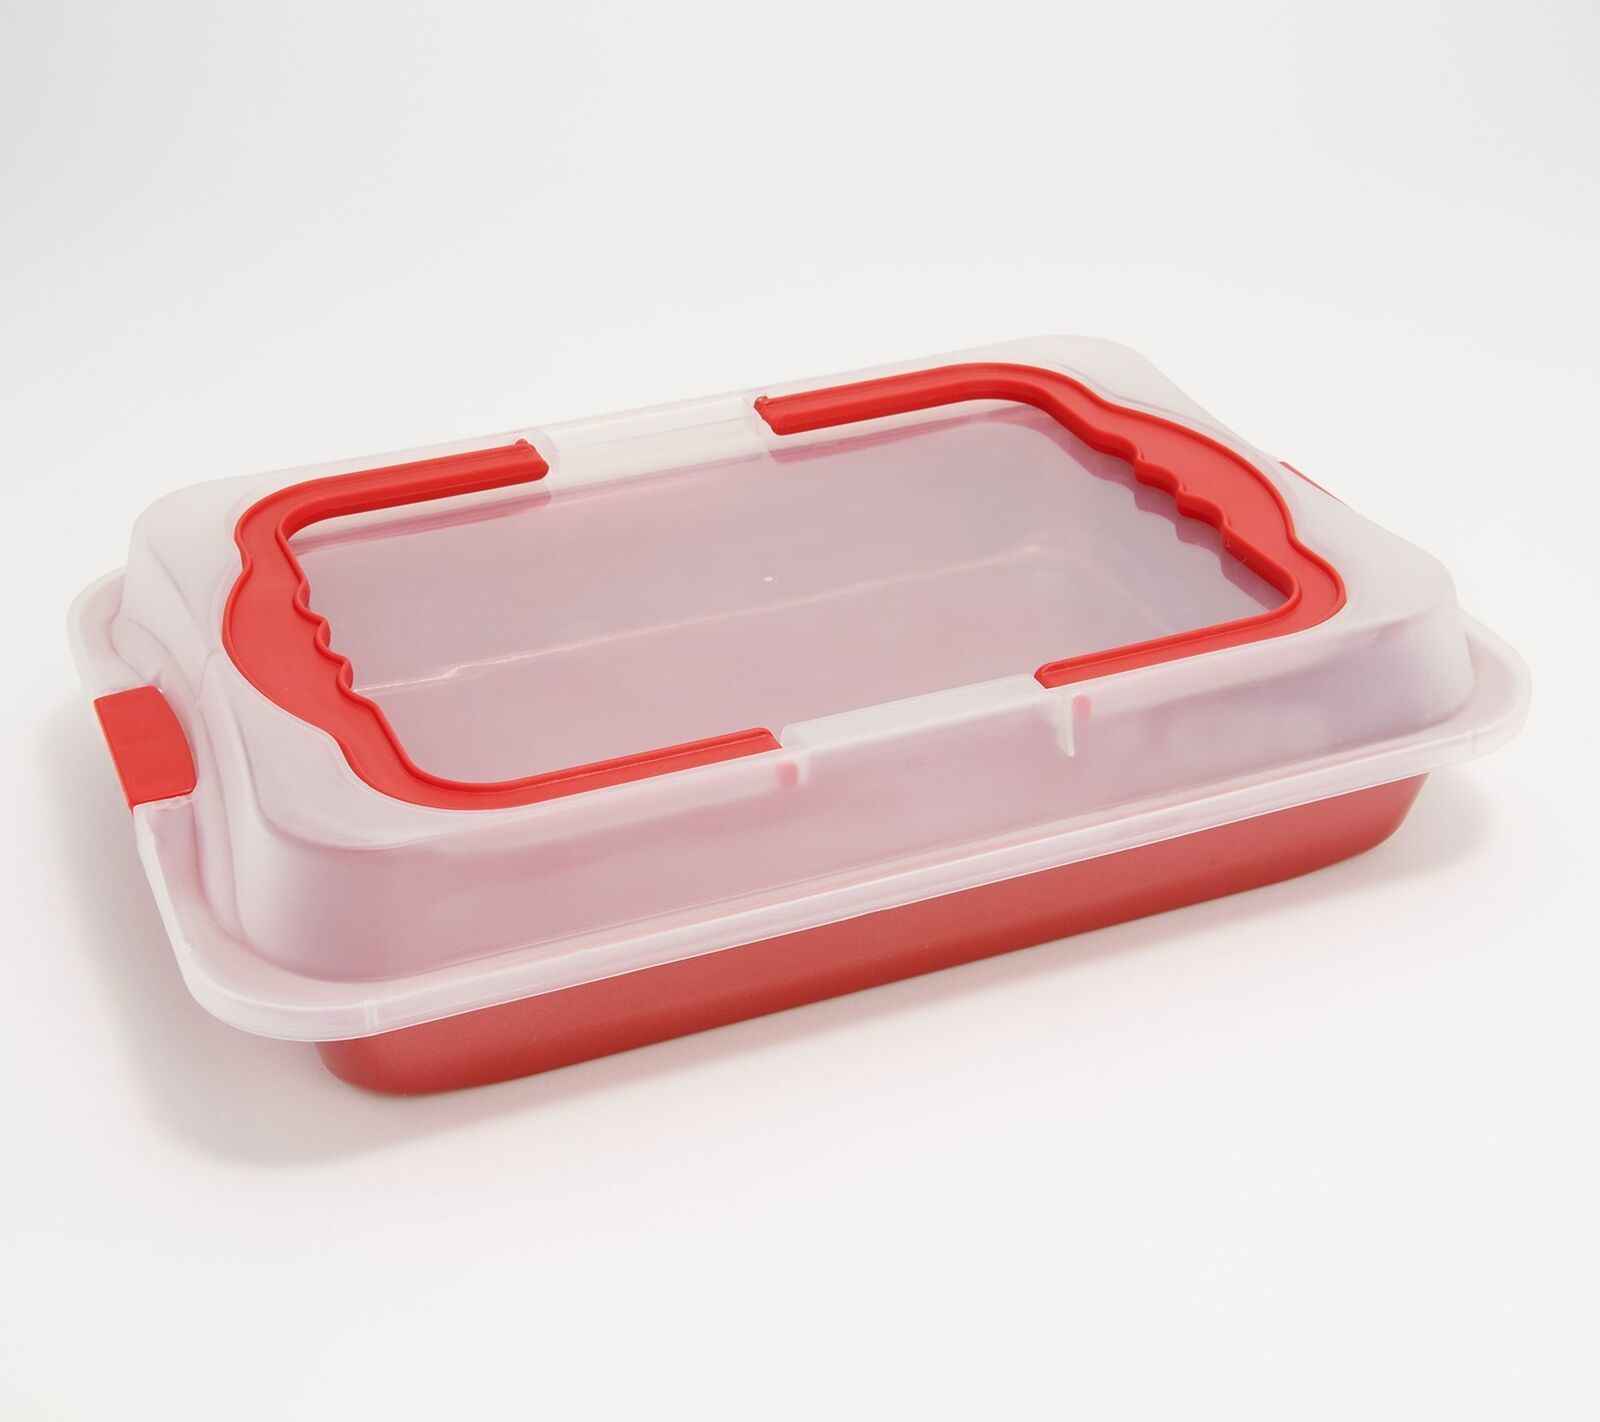 Cook's Essentials Bake and Take 9" x 13" Pan in Red - $38.79